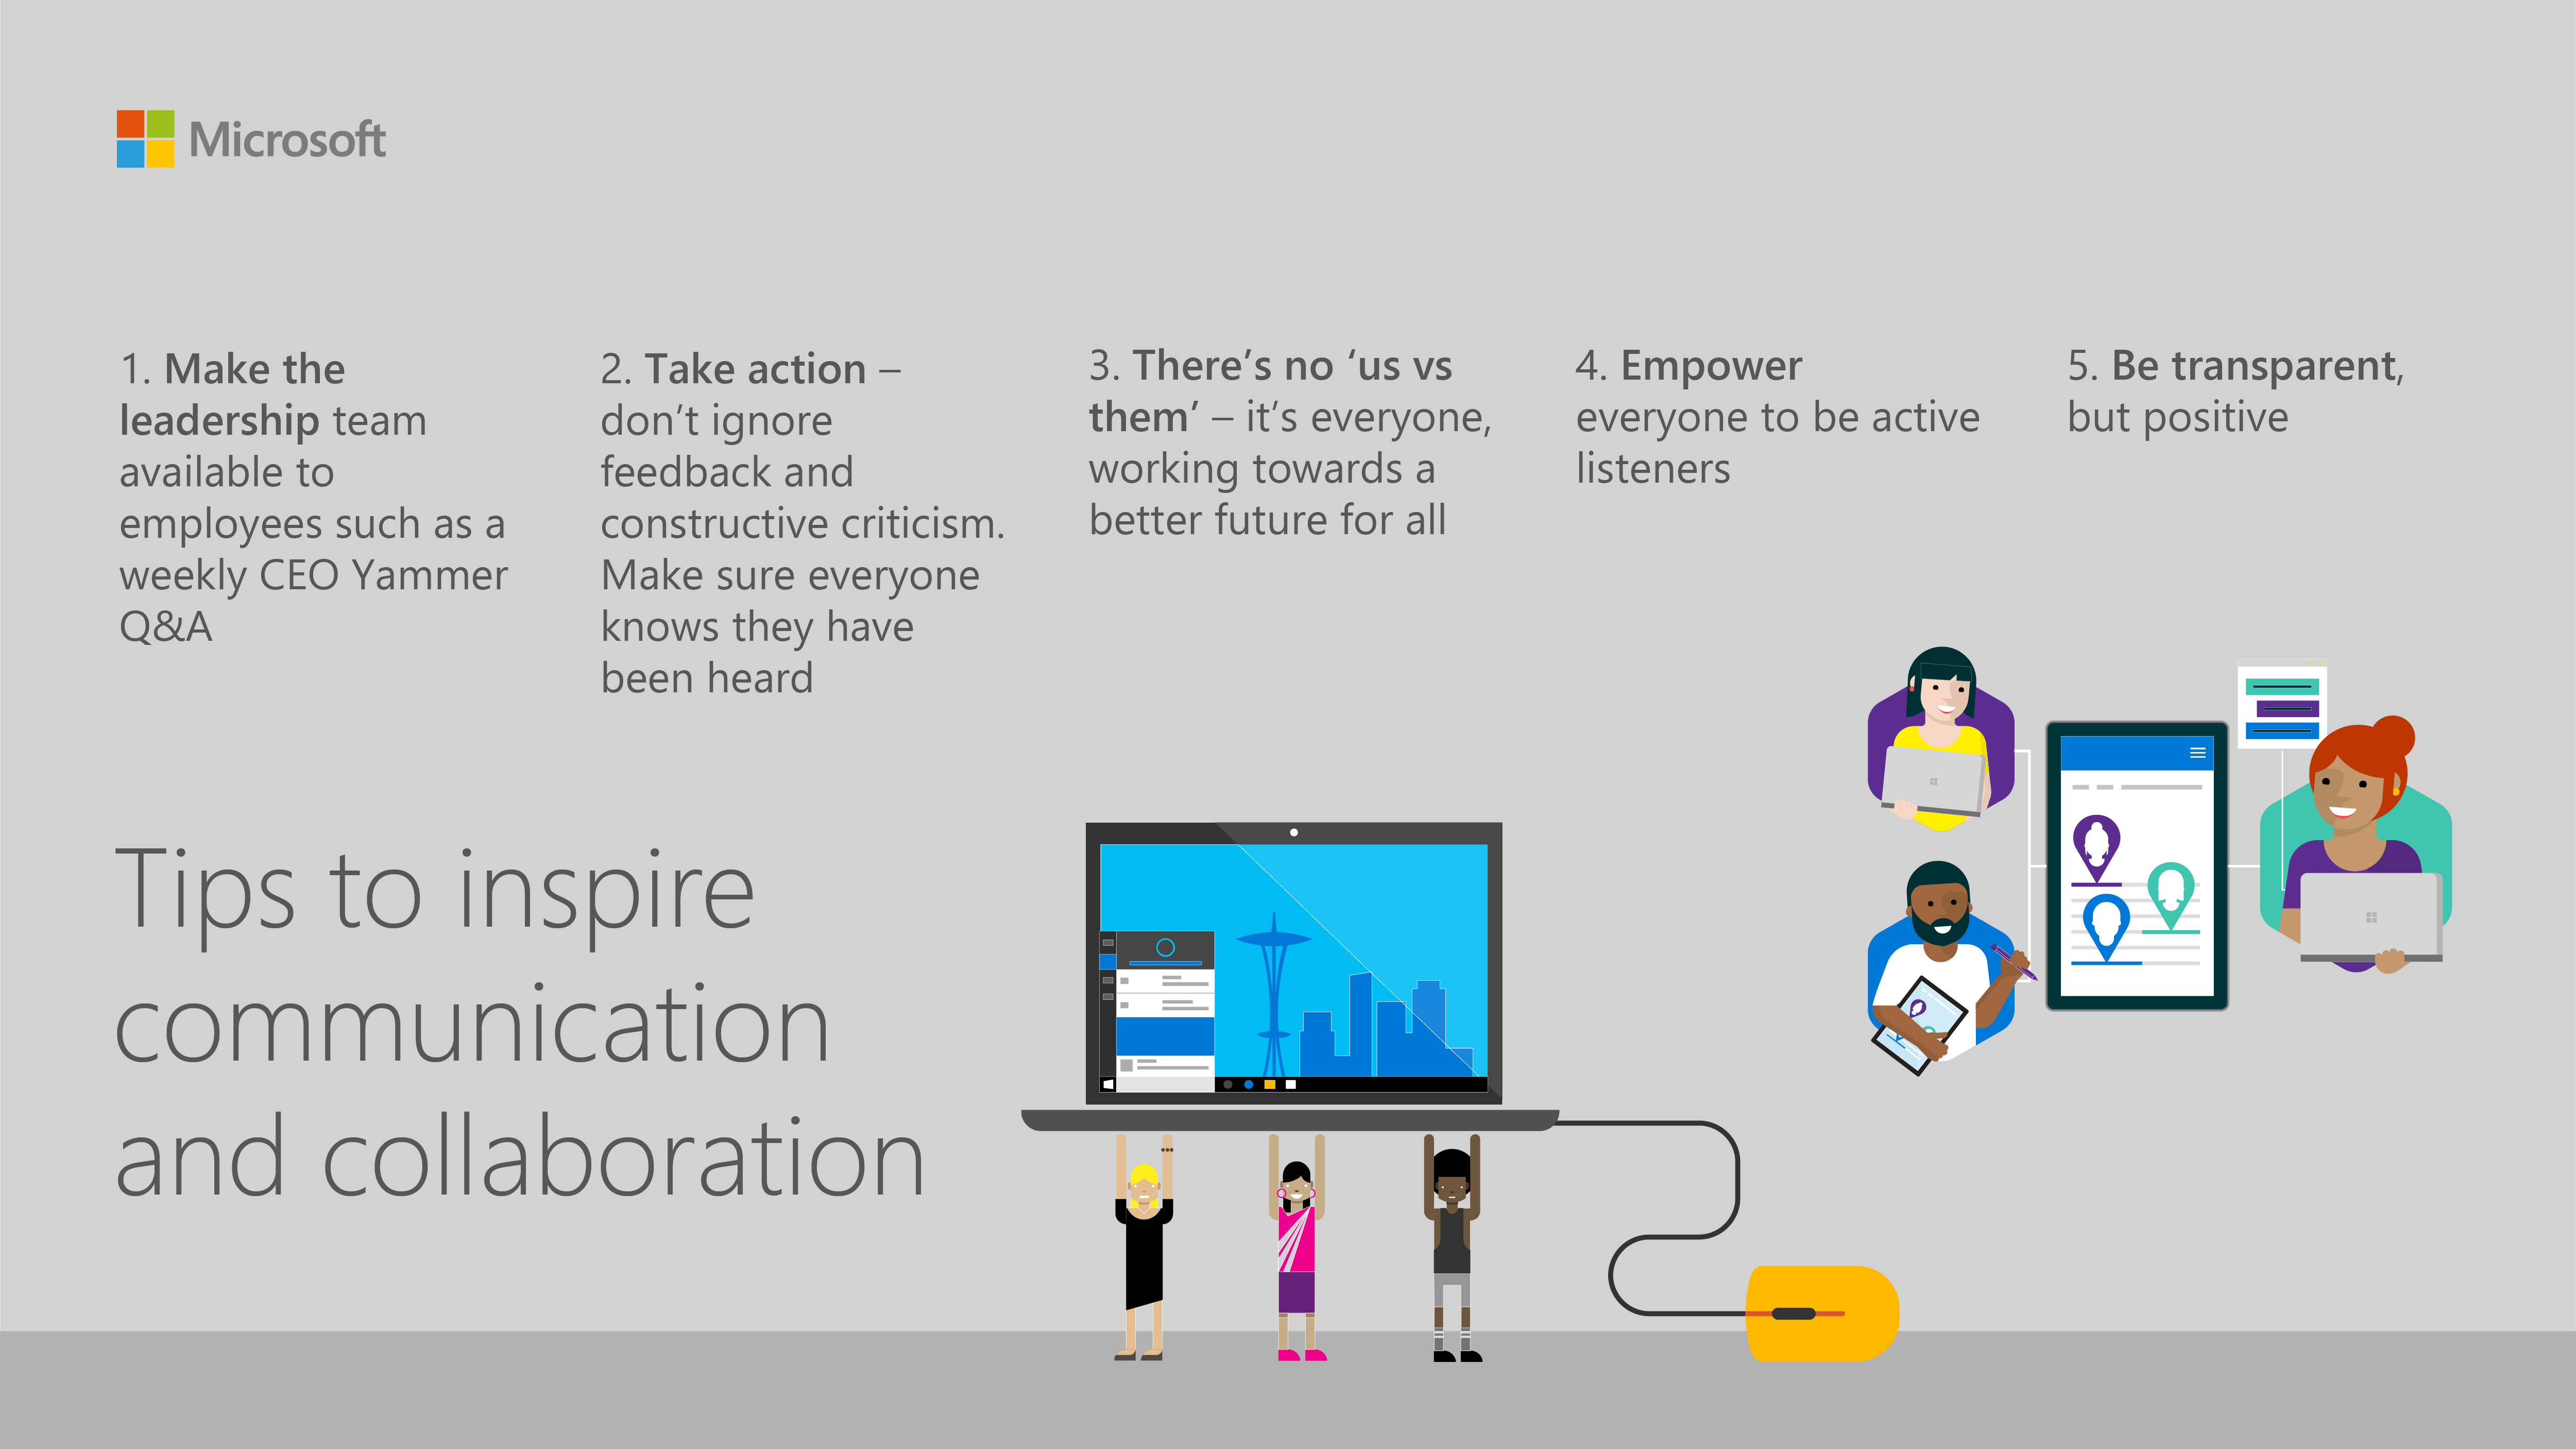 Tips to inspire collaboration and communication